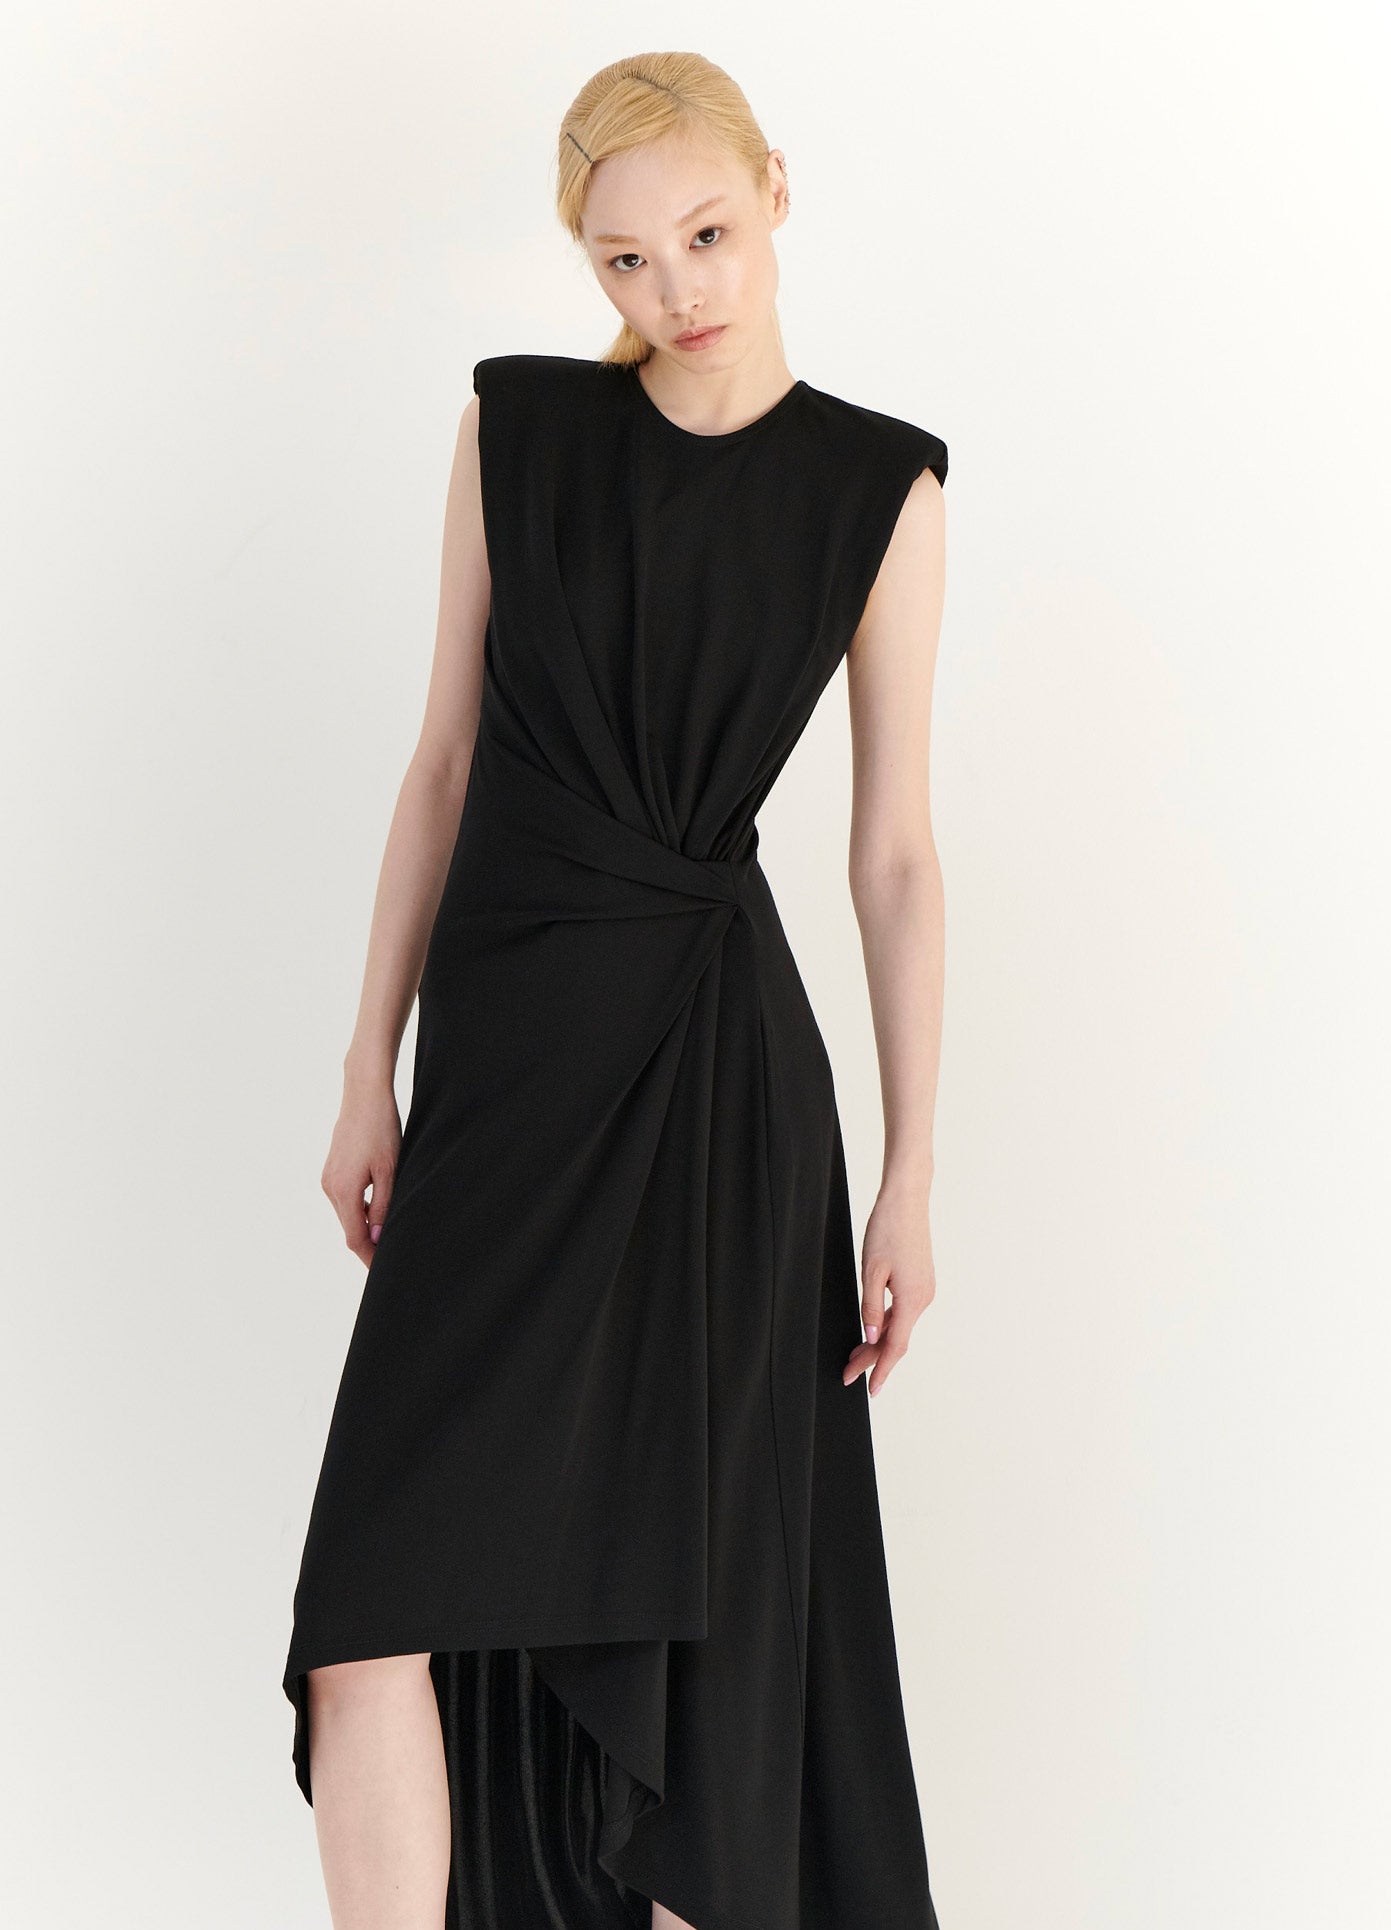 MONSE Gathered Power Shoulder Dress in Black on Model With Head Tilted Front View